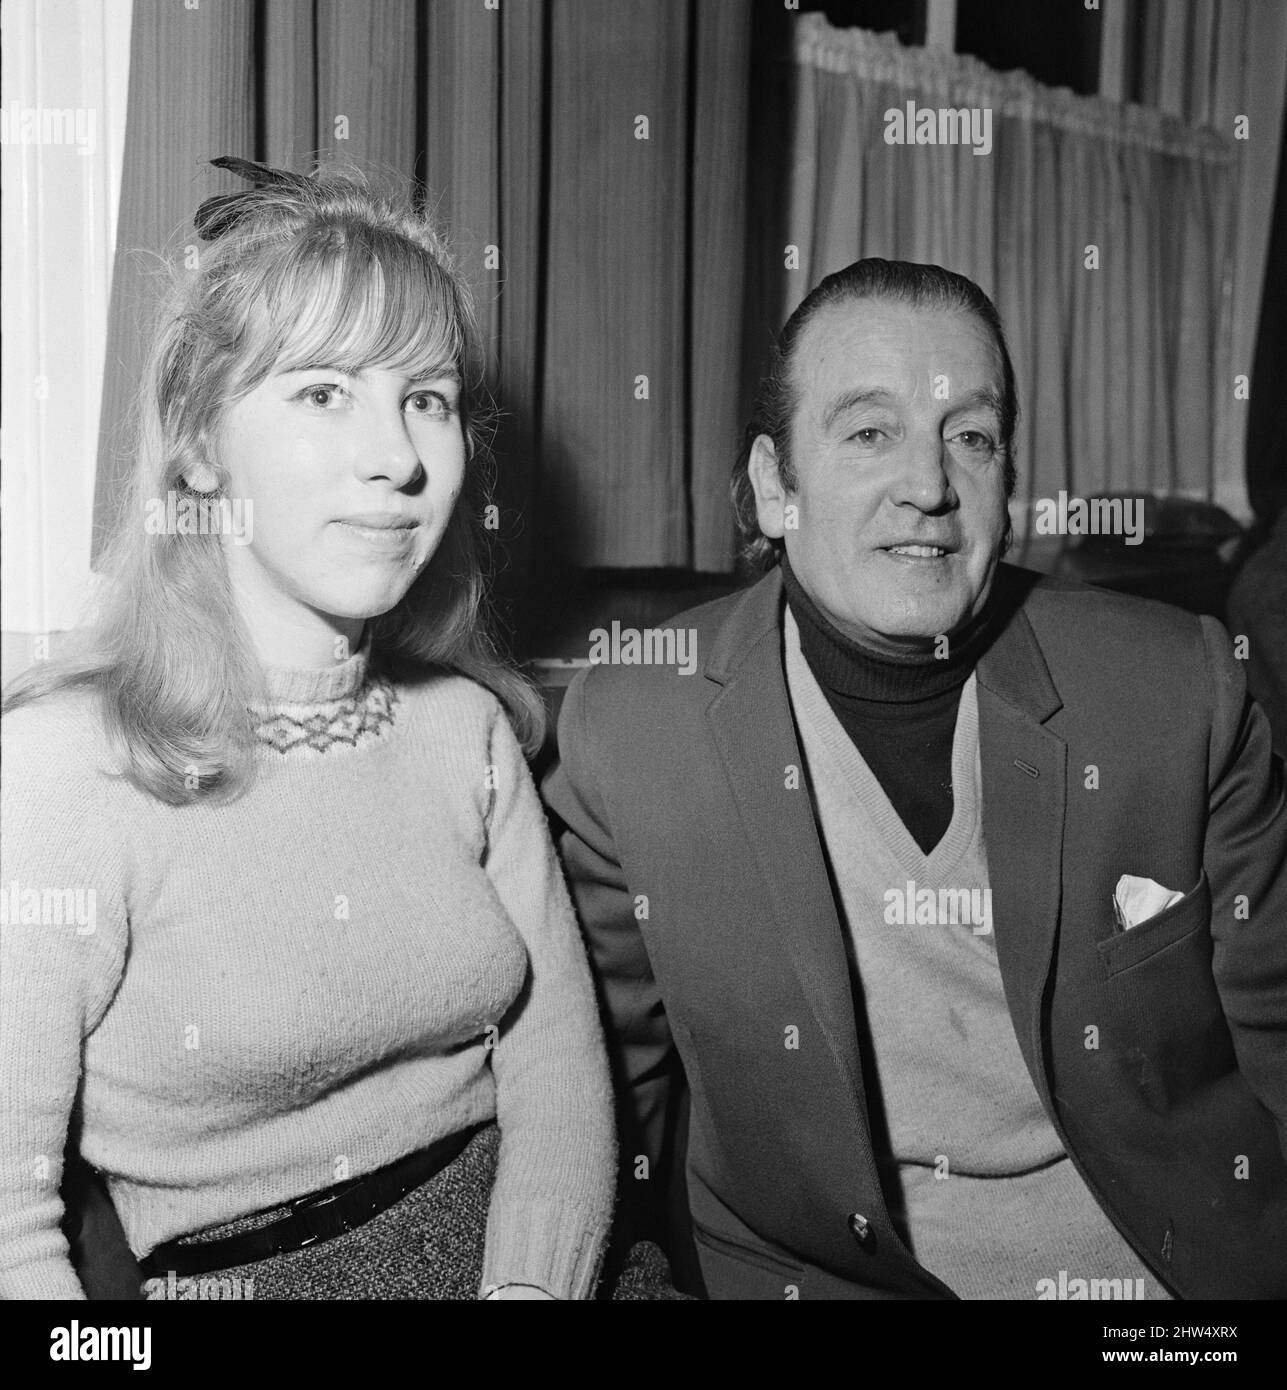 Alfred Lennon, (also knowns as Freddie Lennon), is the father of Beatle John Lennon.Alfred (aged 55) is pictured here with 19 year old Pauline Cole, a former student of Exeter University, who he plans to marry.  Full interview with Alfred Lennon is in The Daily Mirror 6th January 1968, page 1 and back page 28, that says the following....  John Lennon has ended his feud with his father, who left the family home when John was only 4 years old.  Alfred went to sea as a ships steward and later learned that his wife, Julia, had been killed in a road accident in 1958.  In 1964, Alfred suddenly turne Stock Photo